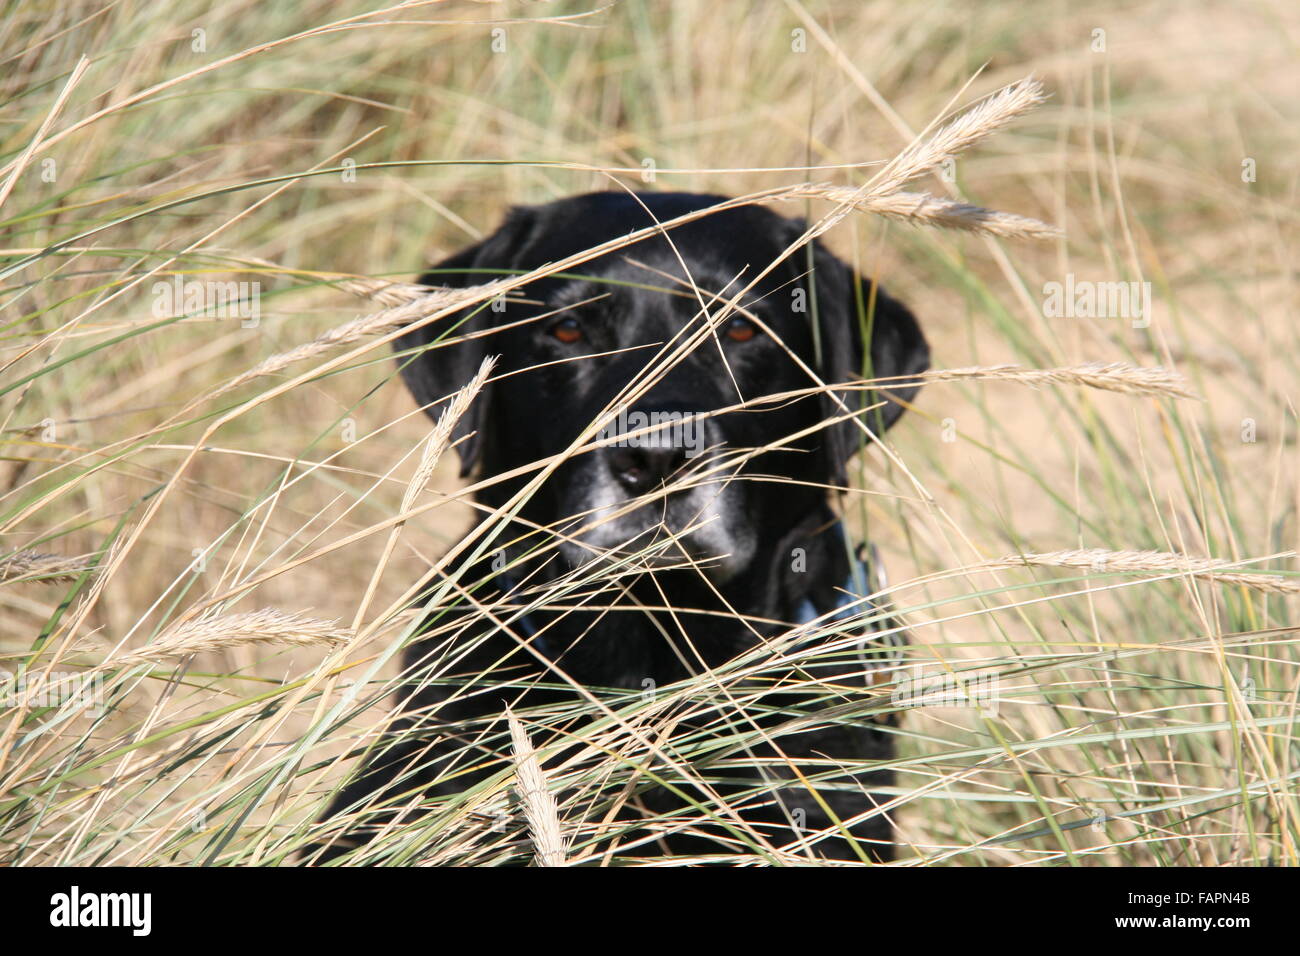 AN ARTISTIC LANDSCAPE PHOTO OF A MALE BLACK LABRADOR DOG WITH HEAD AND SHOULDERS SEEN THROUGH LONG GRASS,EYES VISIBLE Stock Photo